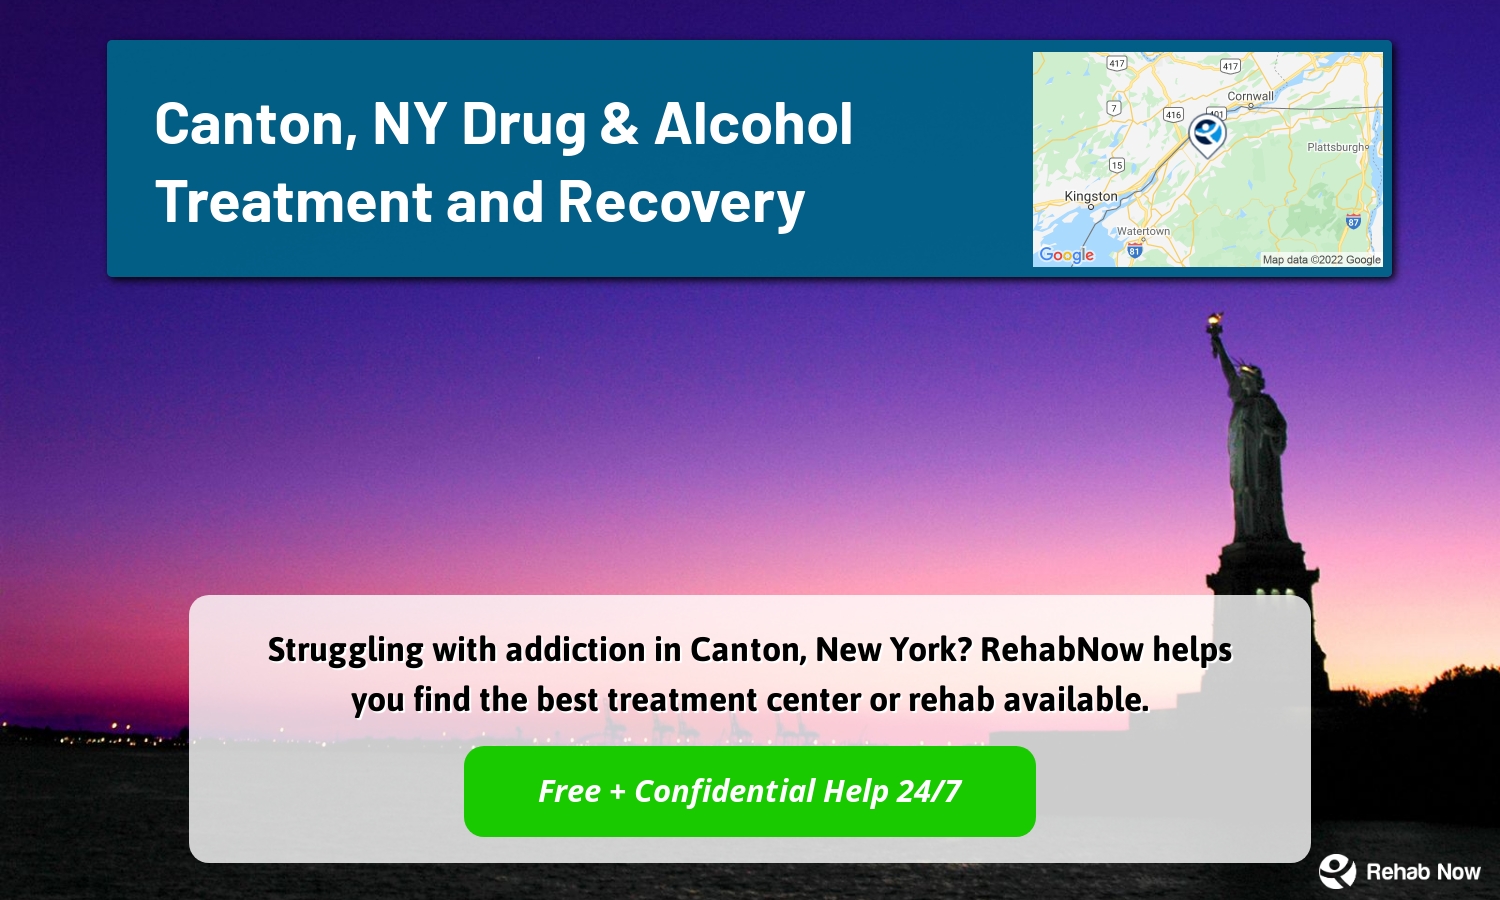 Struggling with addiction in Canton, New York? RehabNow helps you find the best treatment center or rehab available.